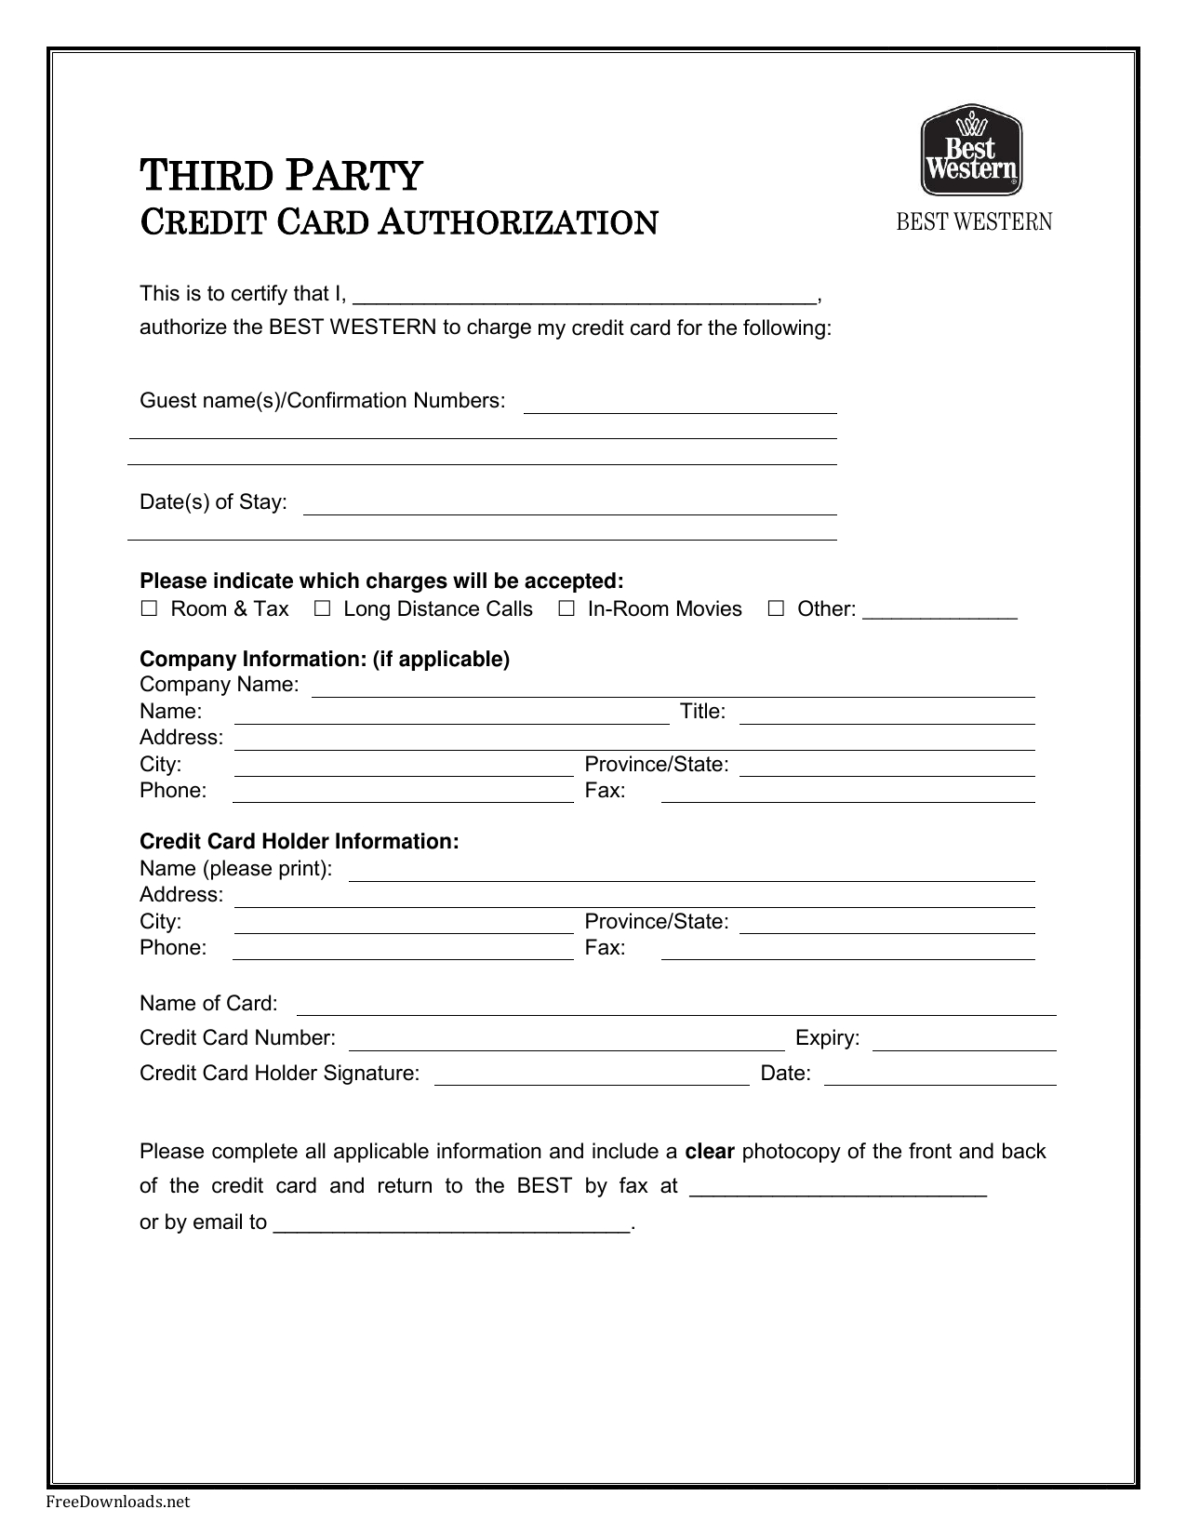 Hotel Credit Card Authorization Form Template 1877